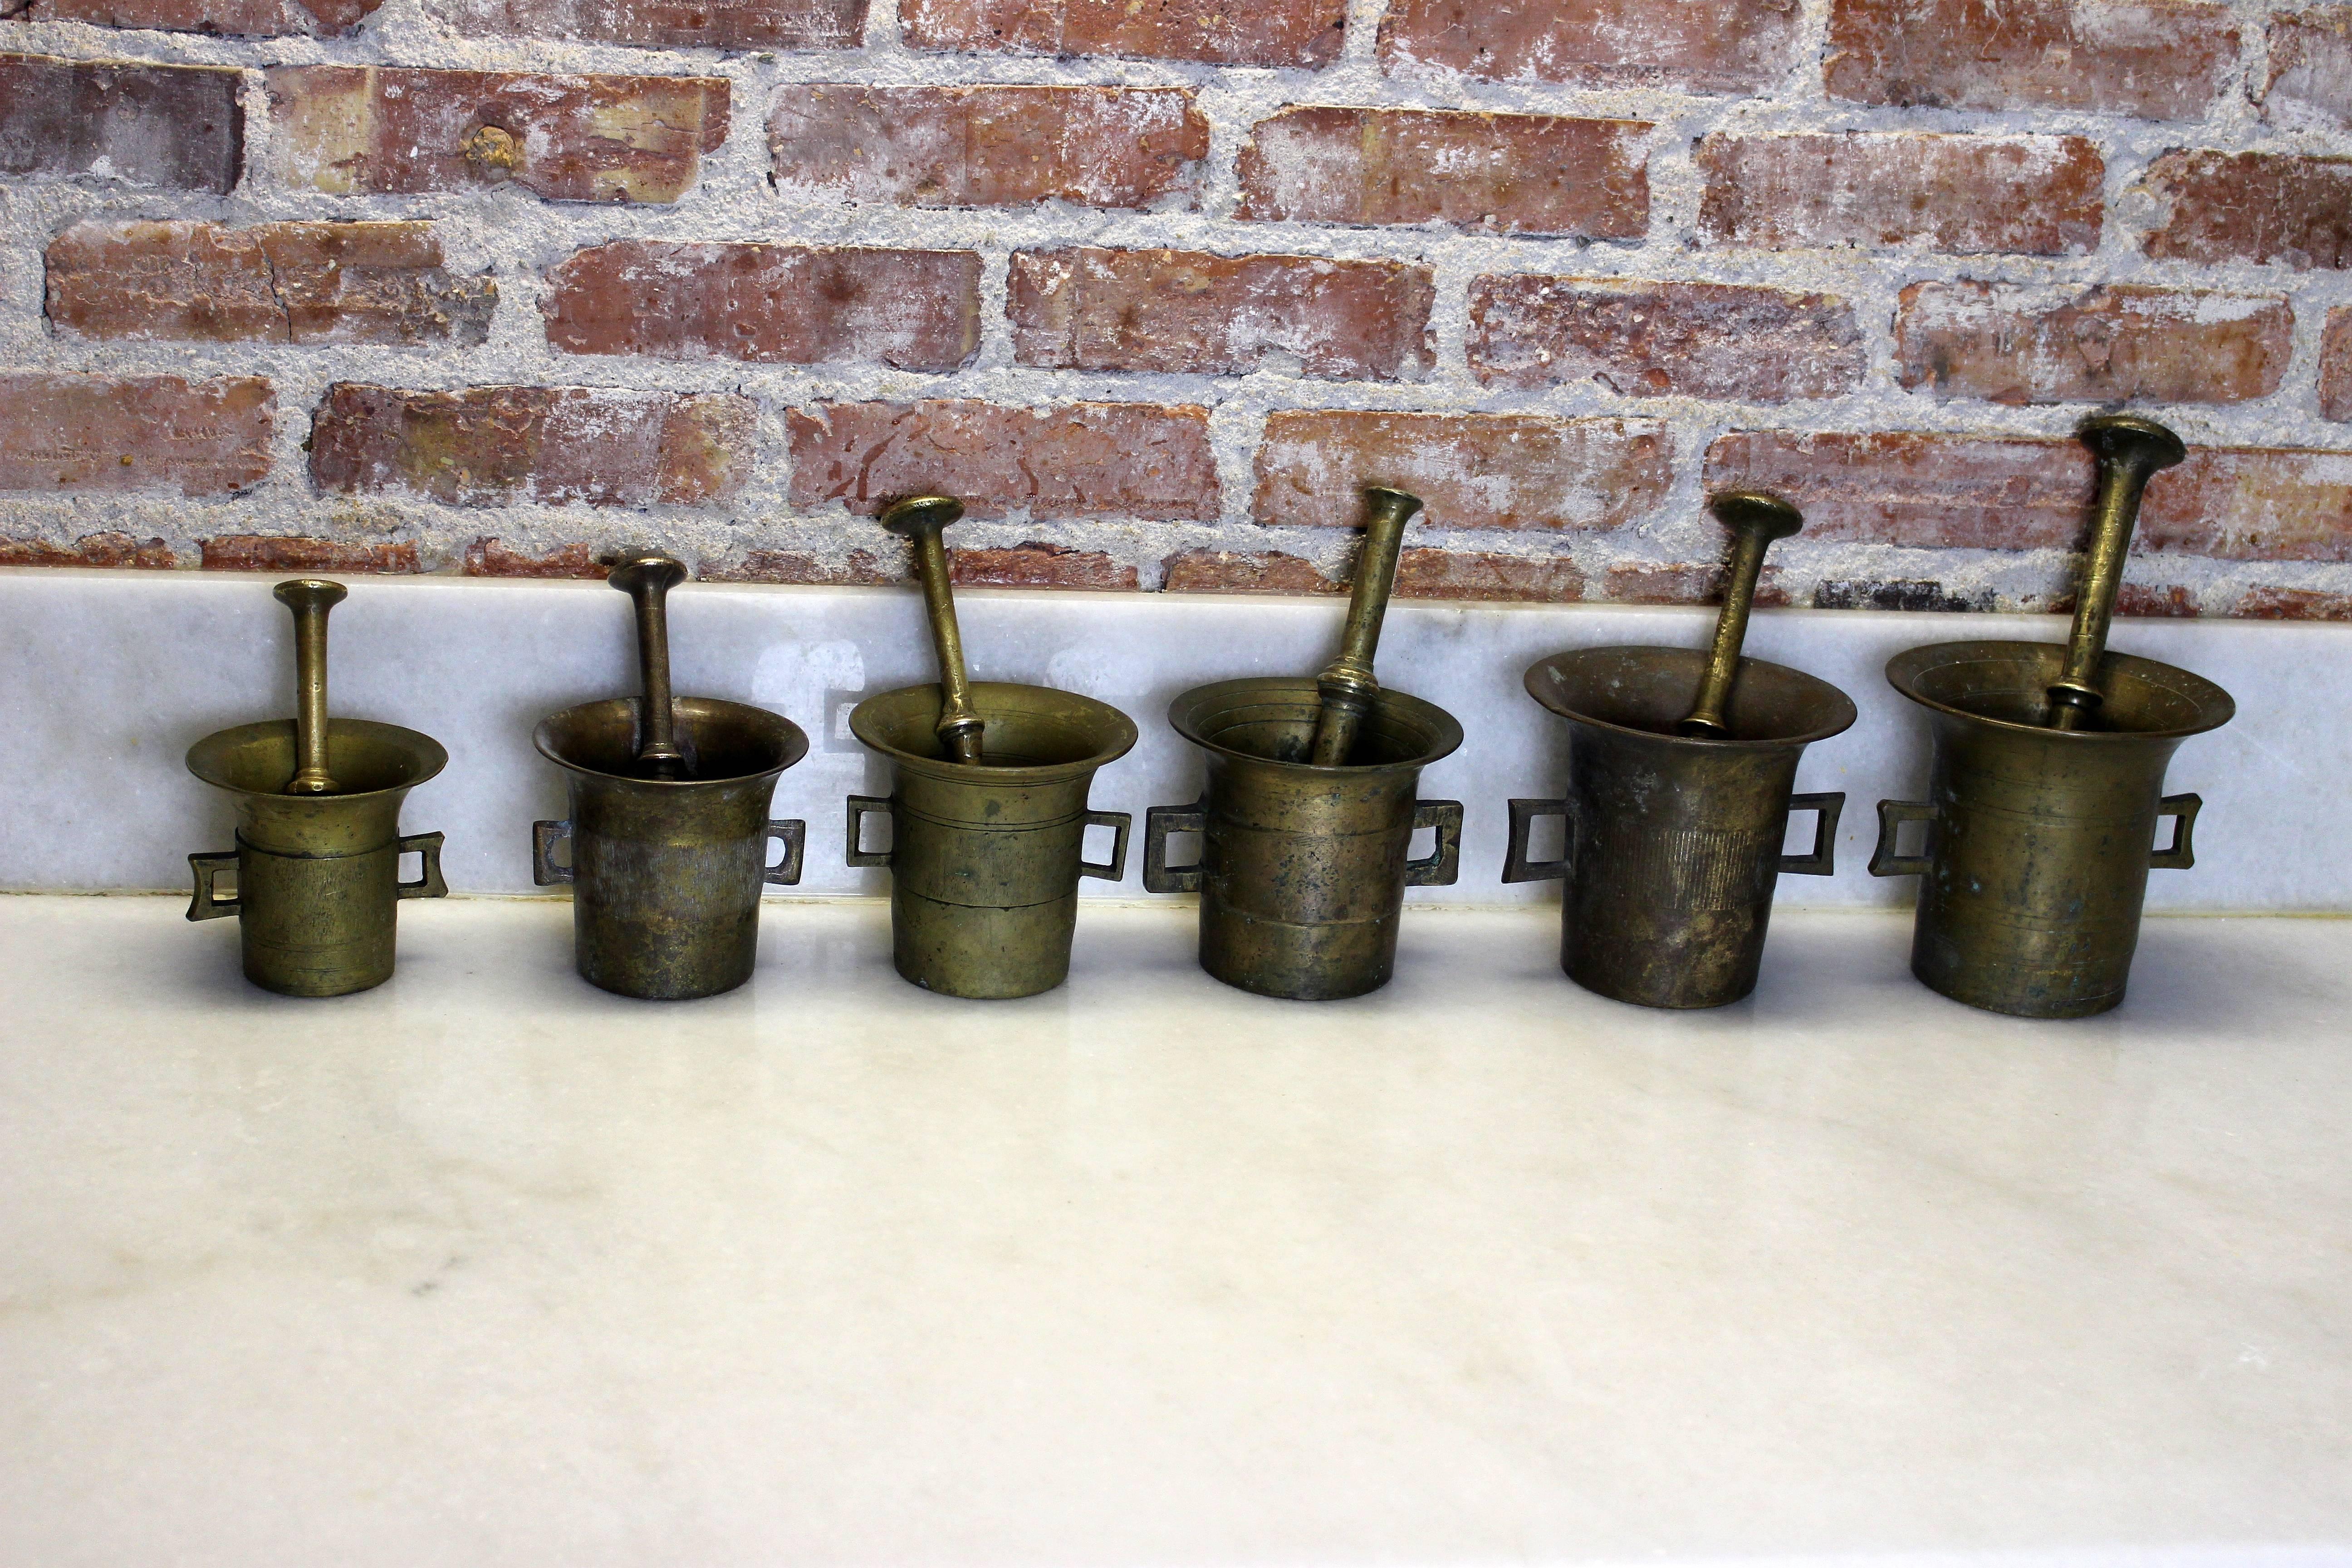 Campaign 19th Century European Mortar and Pestles Set of Nine Pieces